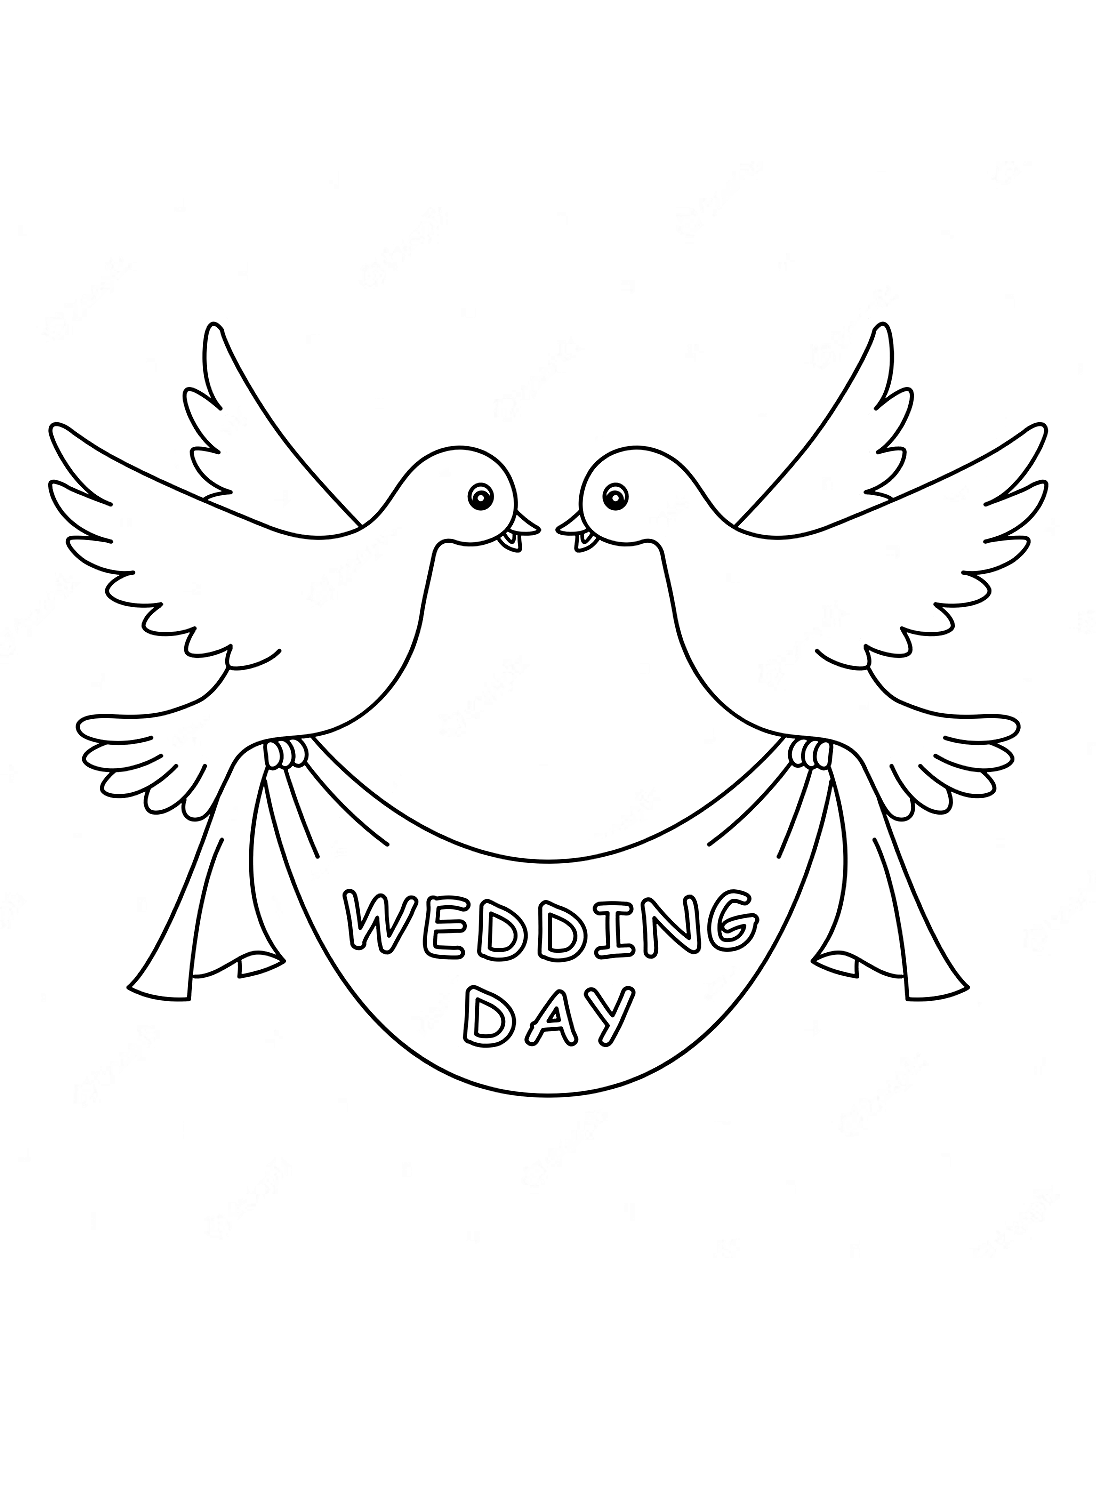 A wedding day and doves from Doves